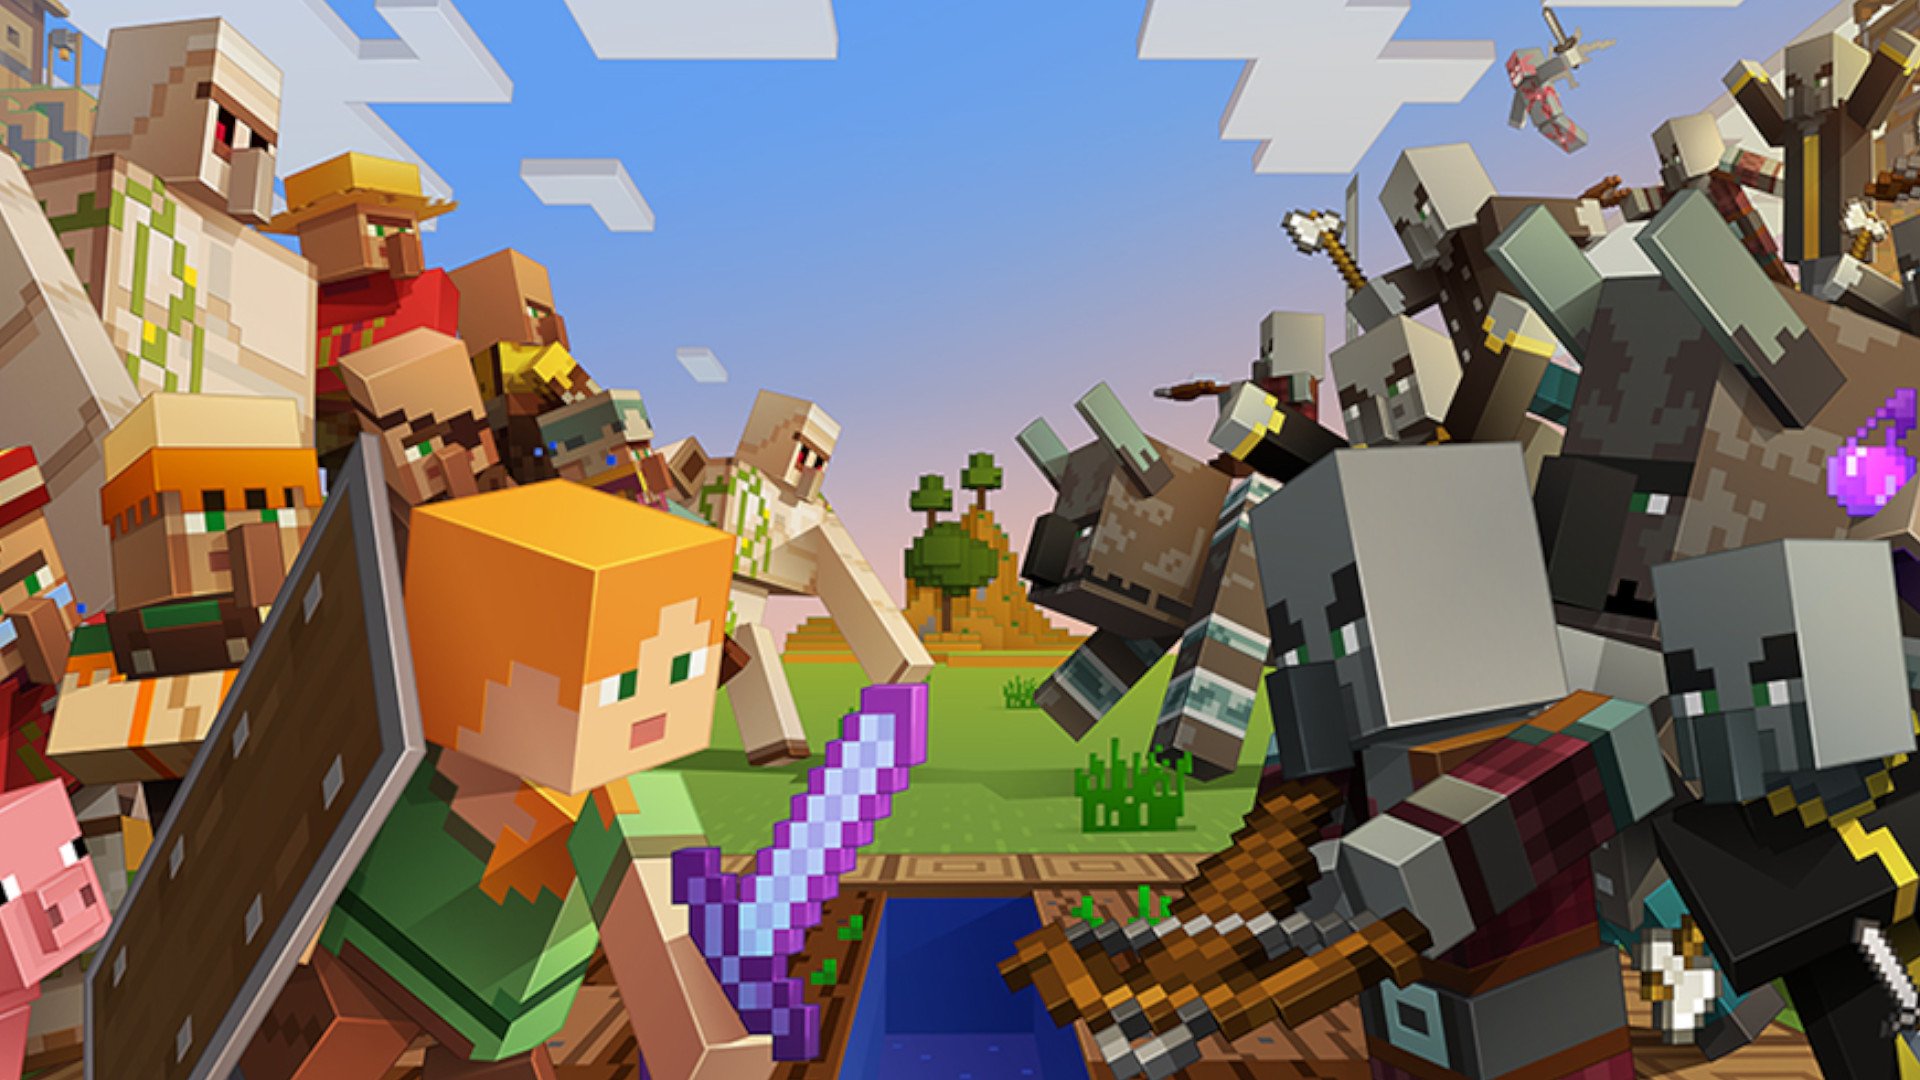 Minecraft Bedrock Edition 1.16.100.56 Beta Has A Variety Of Different Changes Focused on Creators